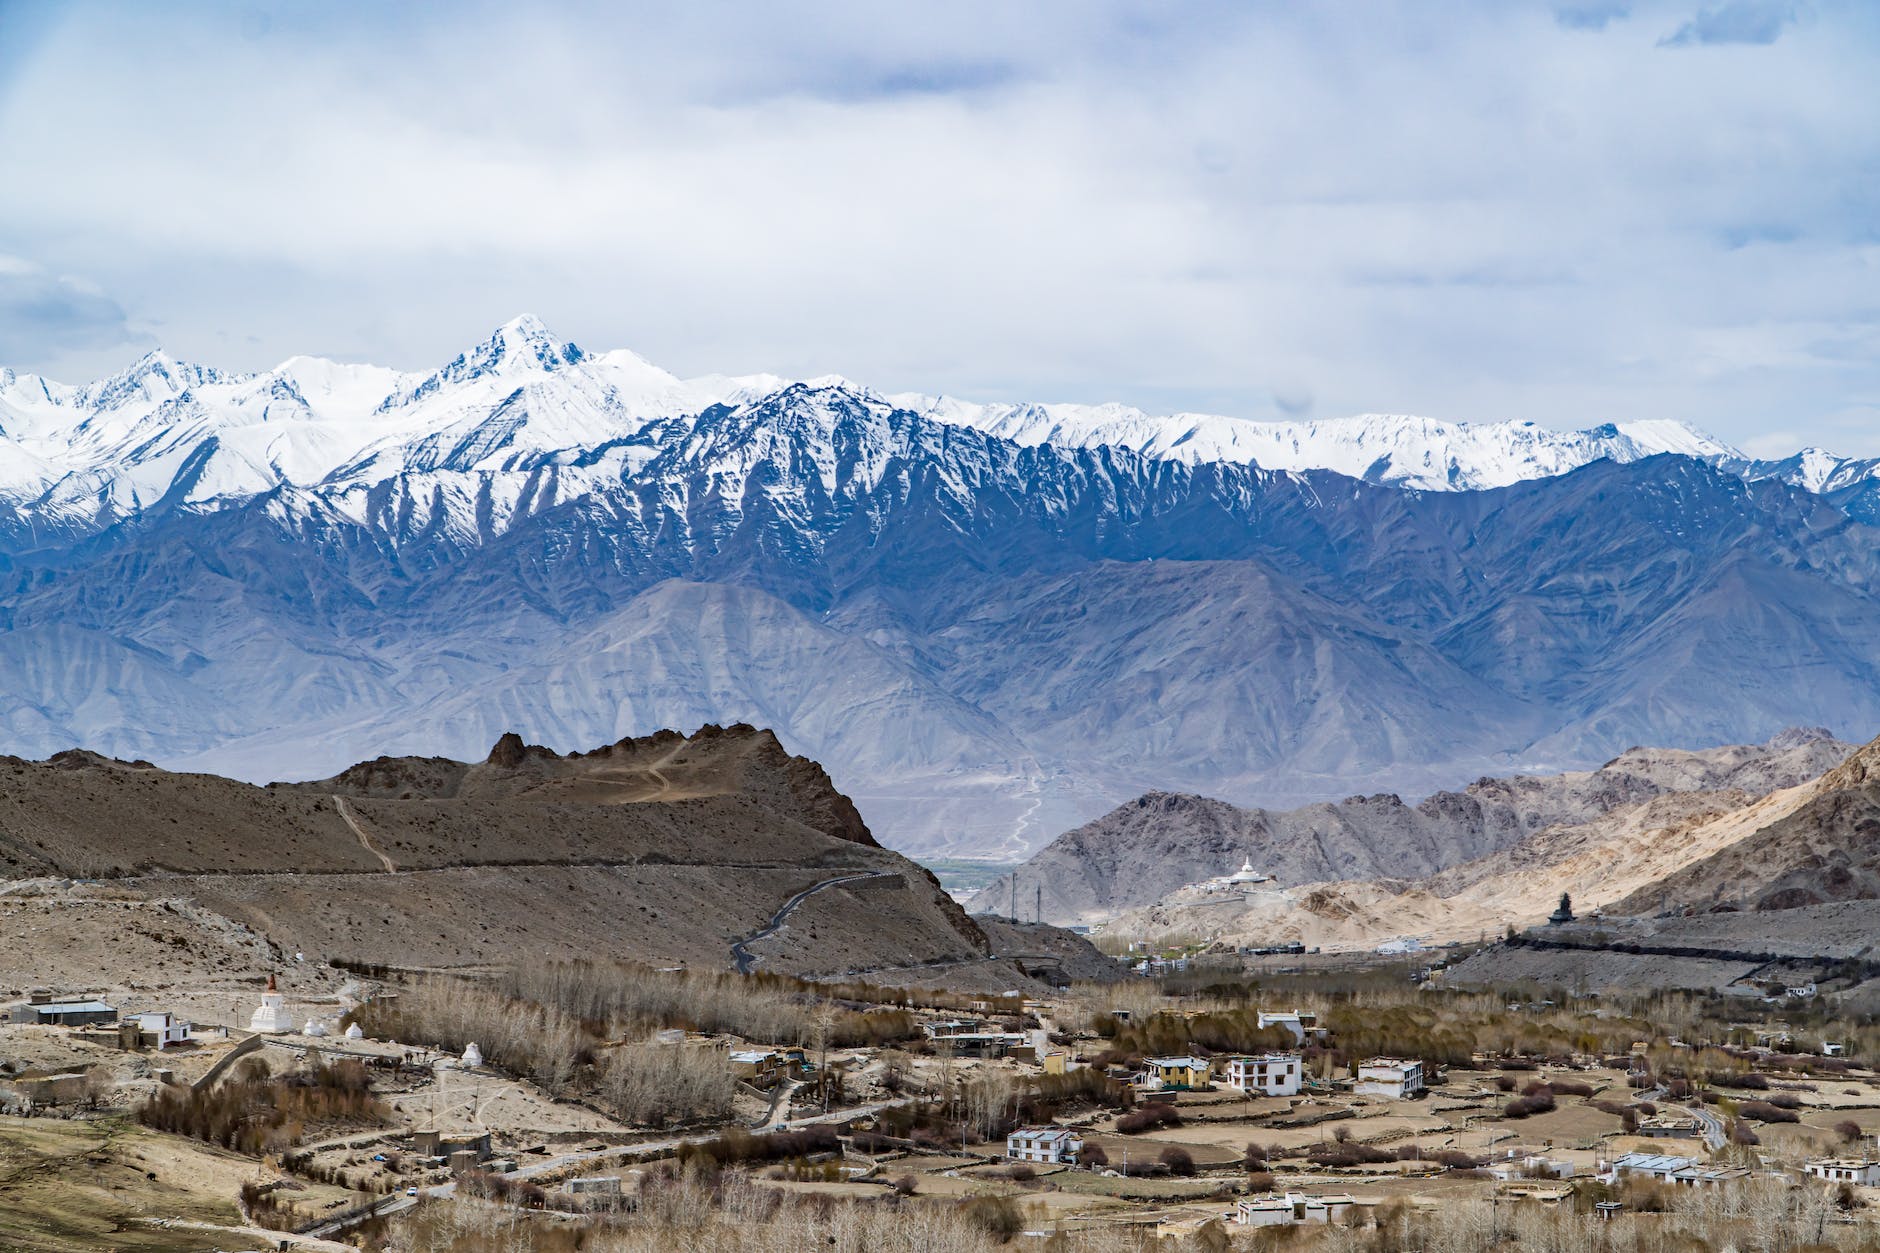 A 10 day winter itinerary to Spiti Valley